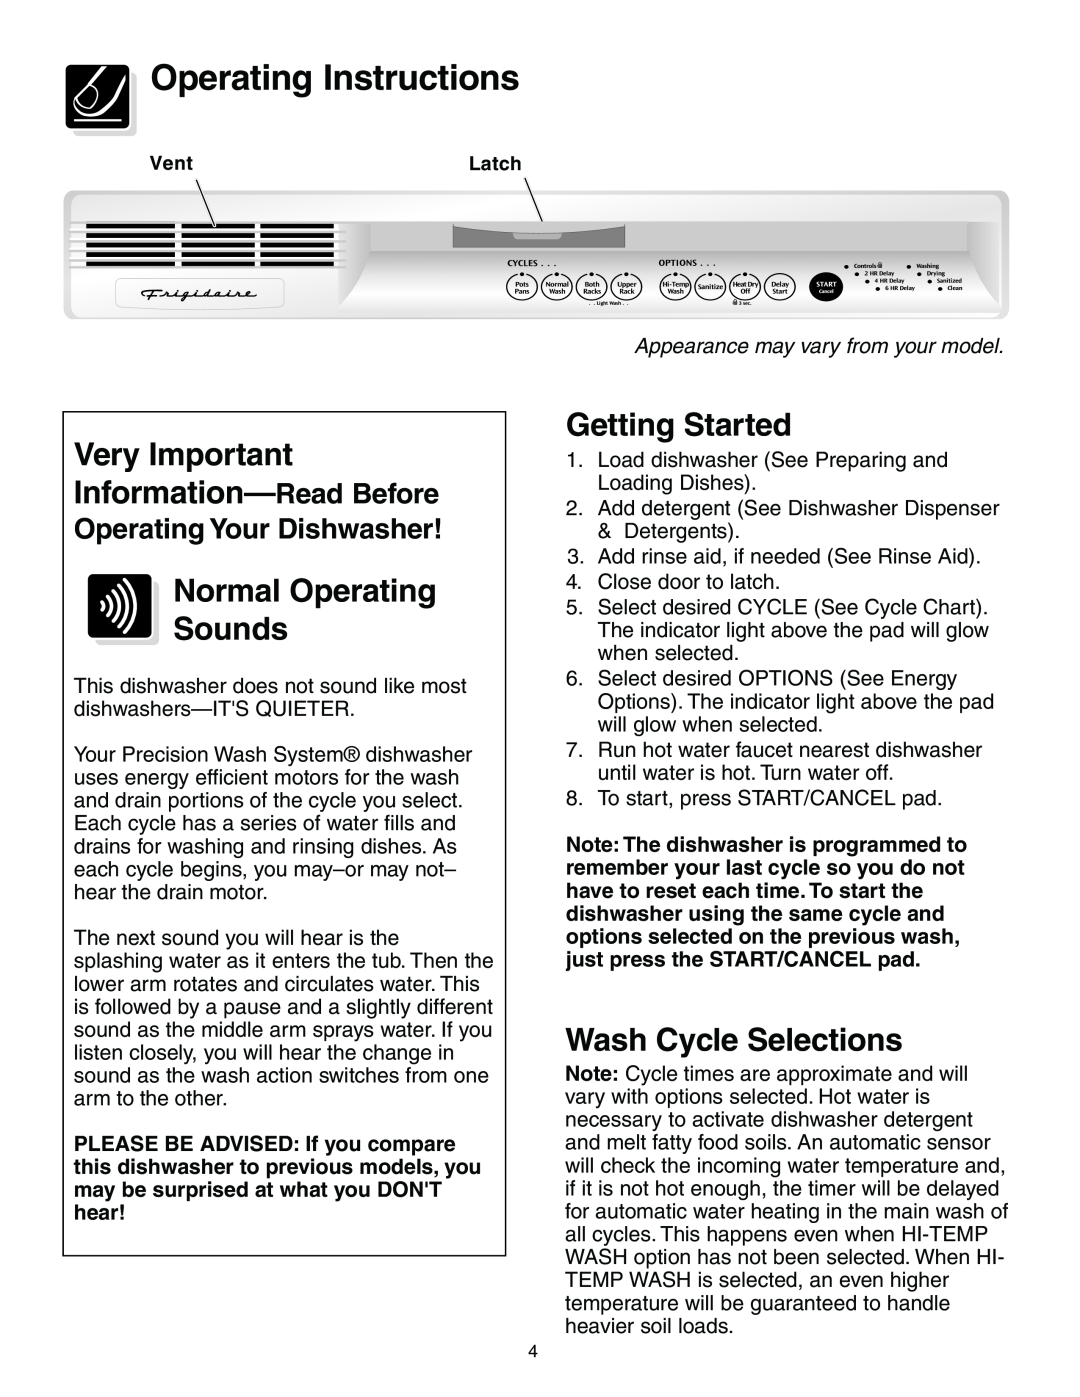 Frigidaire 950 Series warranty Operating Instructions, Normal Operating Sounds, Getting Started, Wash Cycle Selections 